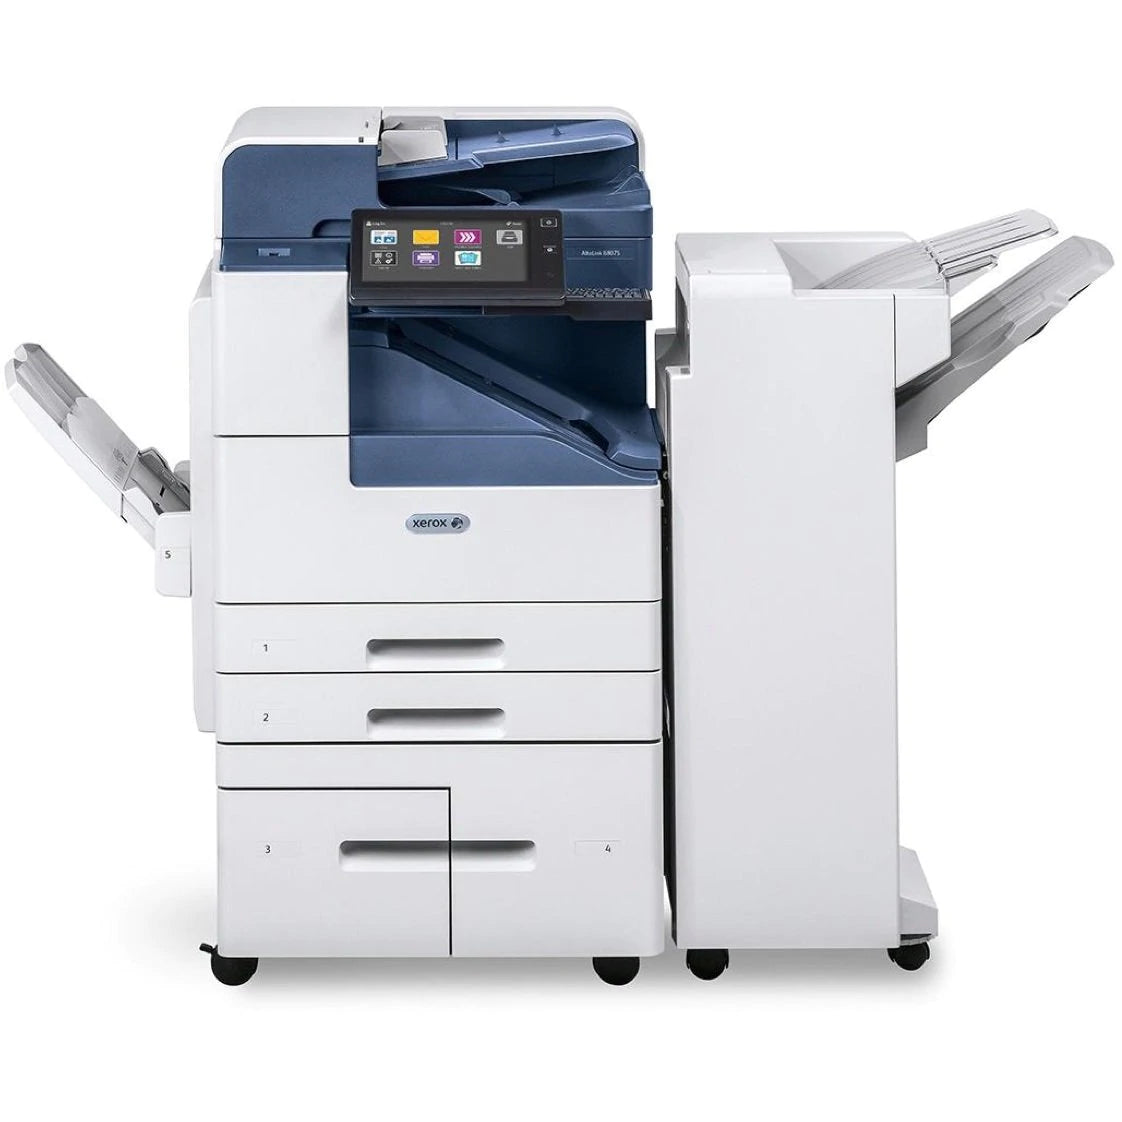 Introducing The Xerox AltaLink B8045 Black-And-White Multifunction Printer (Copy, Print, Scan, Email) With Customizable Touchscreen And Built-In Mobile Connectivity - For Sale By Absolute Toner In Toronto